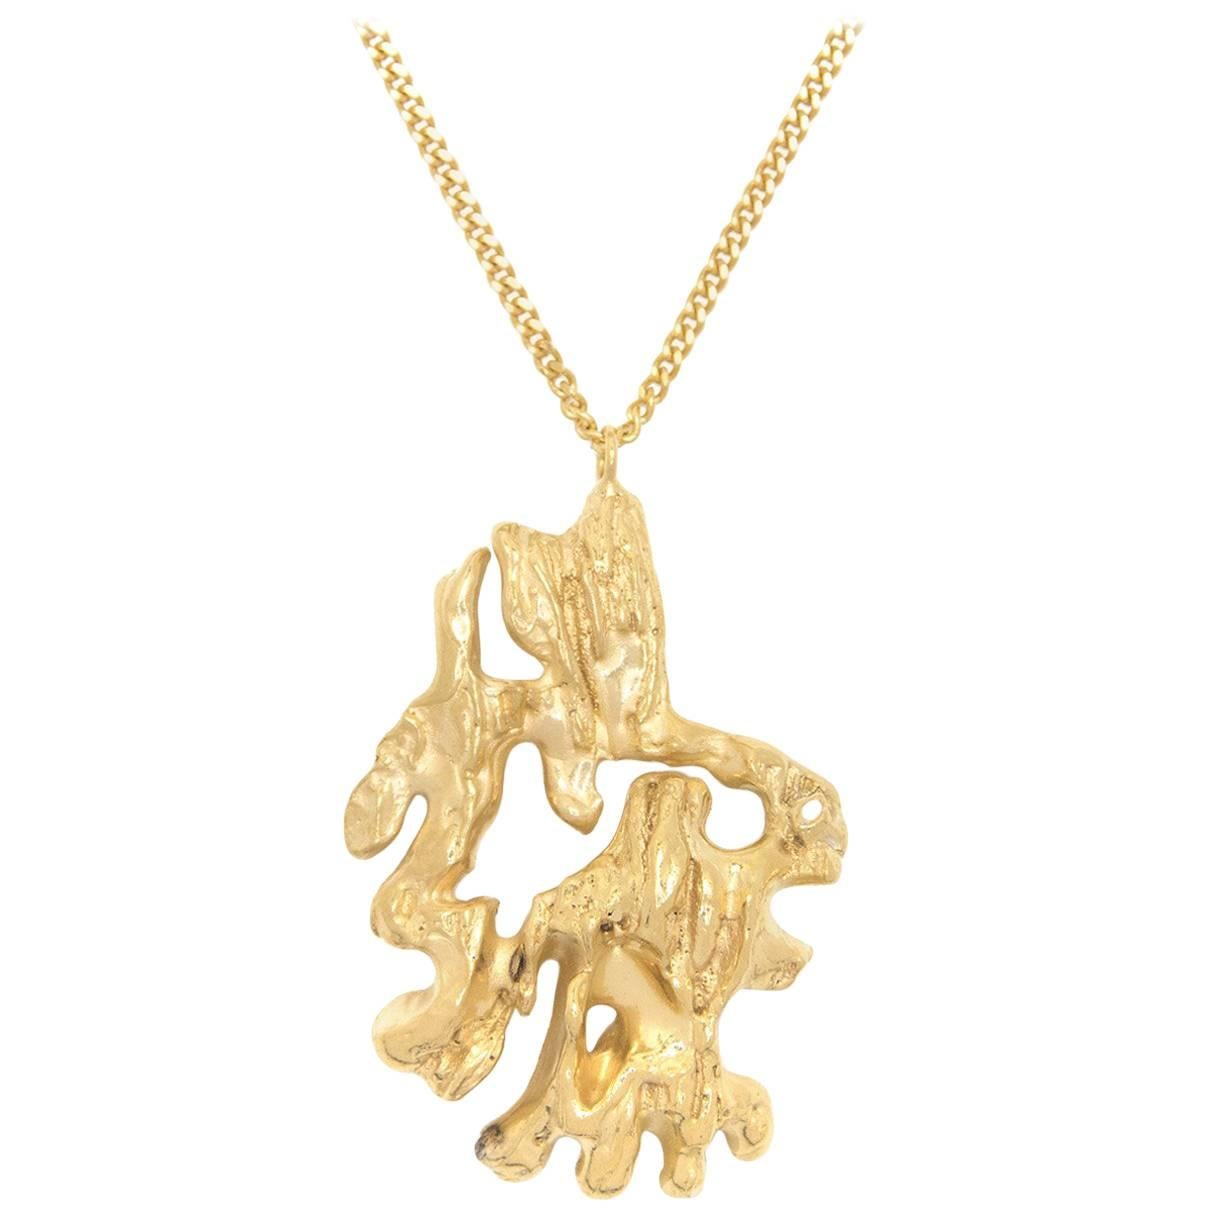 Loveness Lee Chinese Zodiac Monkey Horoscope Gold Pendant Necklace For Sale